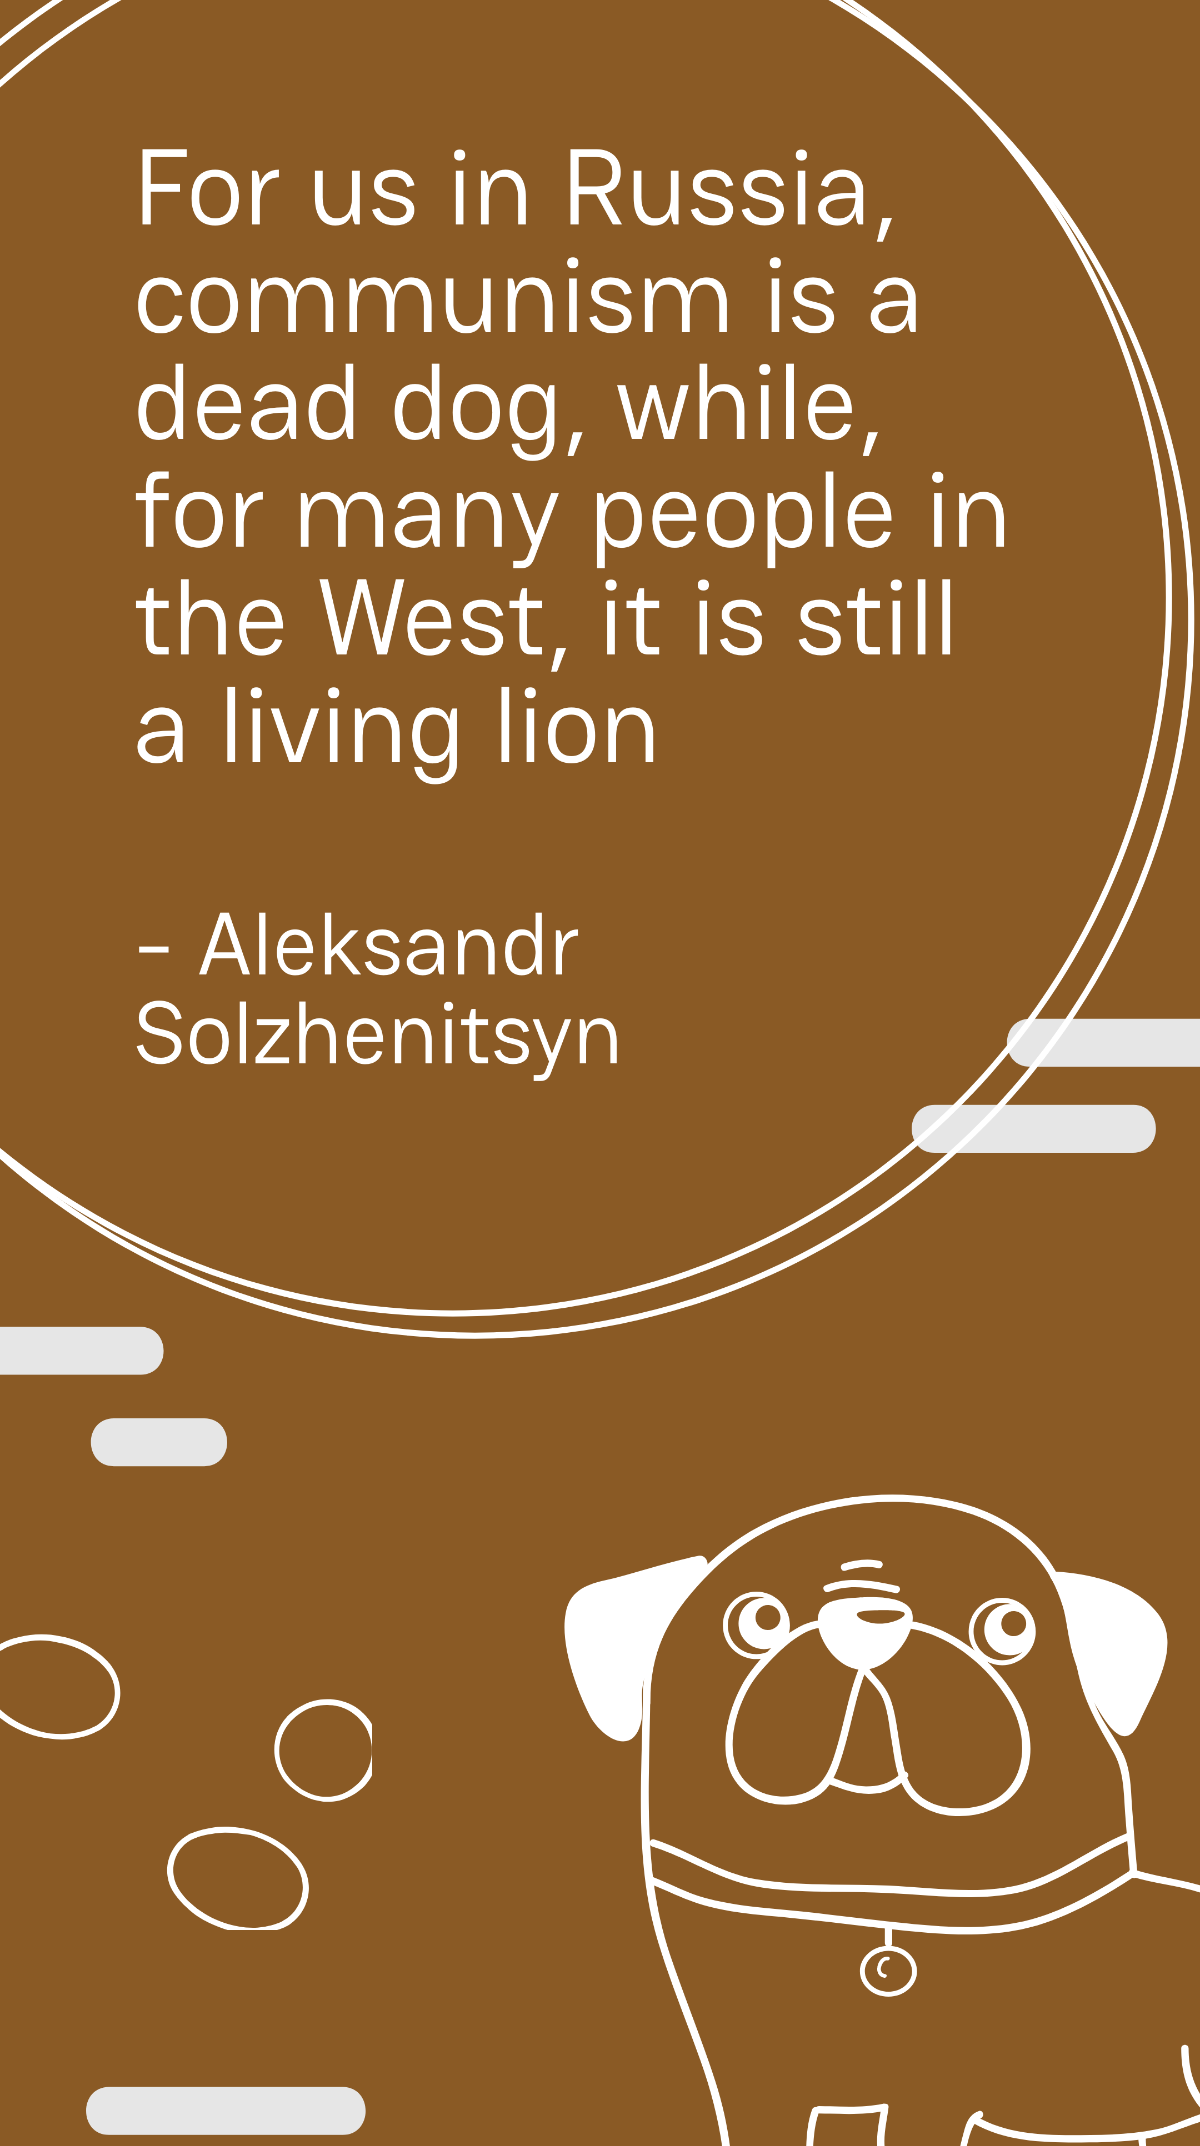 Aleksandr Solzhenitsyn - For us in Russia, communism is a dead dog, while, for many people in the West, it is still a living lion